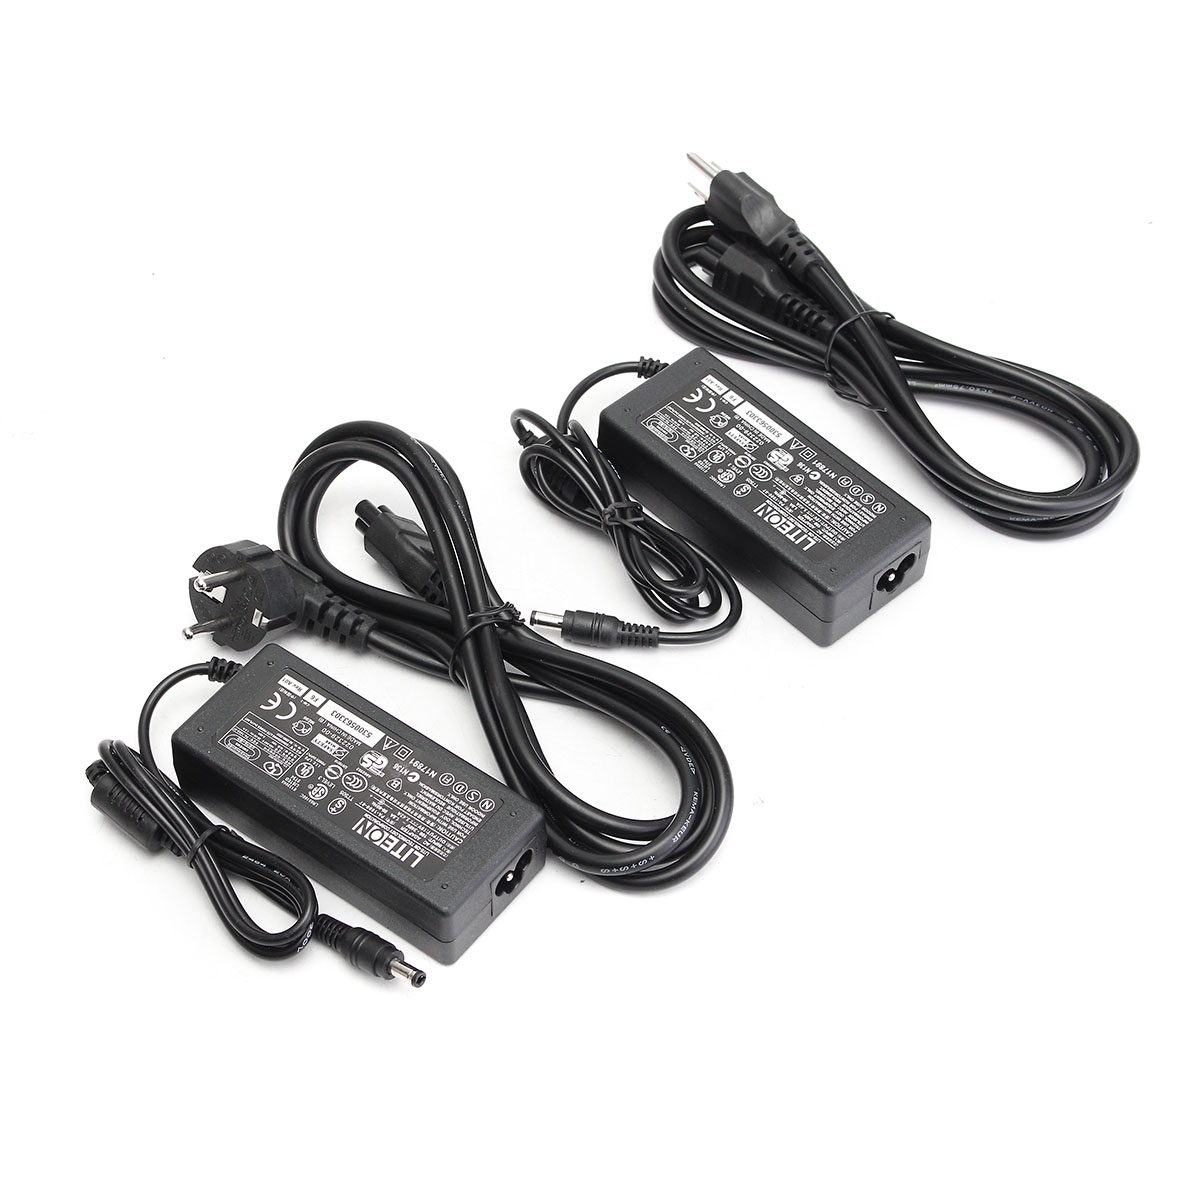 DC-19V-342A--Power-Adapter-Universal-Power-Supply-Charger-USEU-Plug-1363367-2